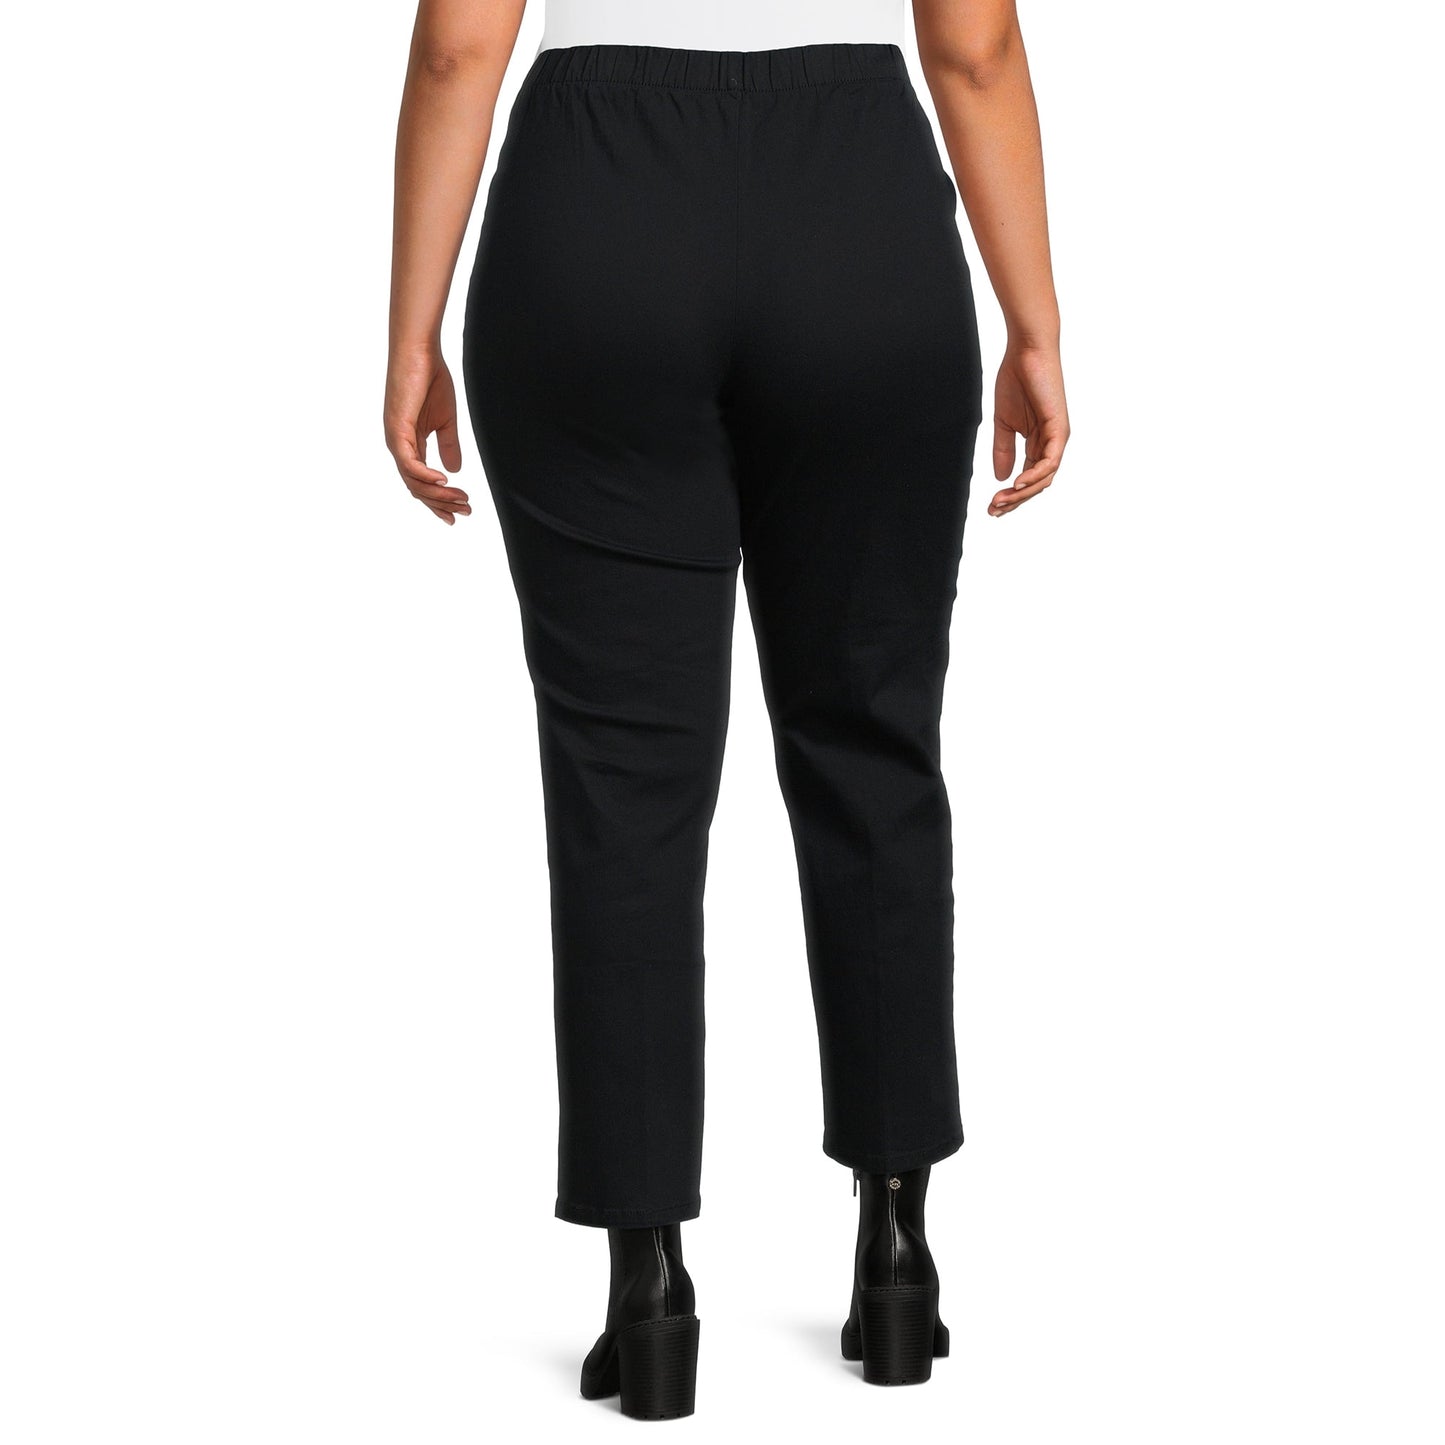 Just My Size Womens Plus Size Pull on 2-Pocket Stretch Woven Pants,